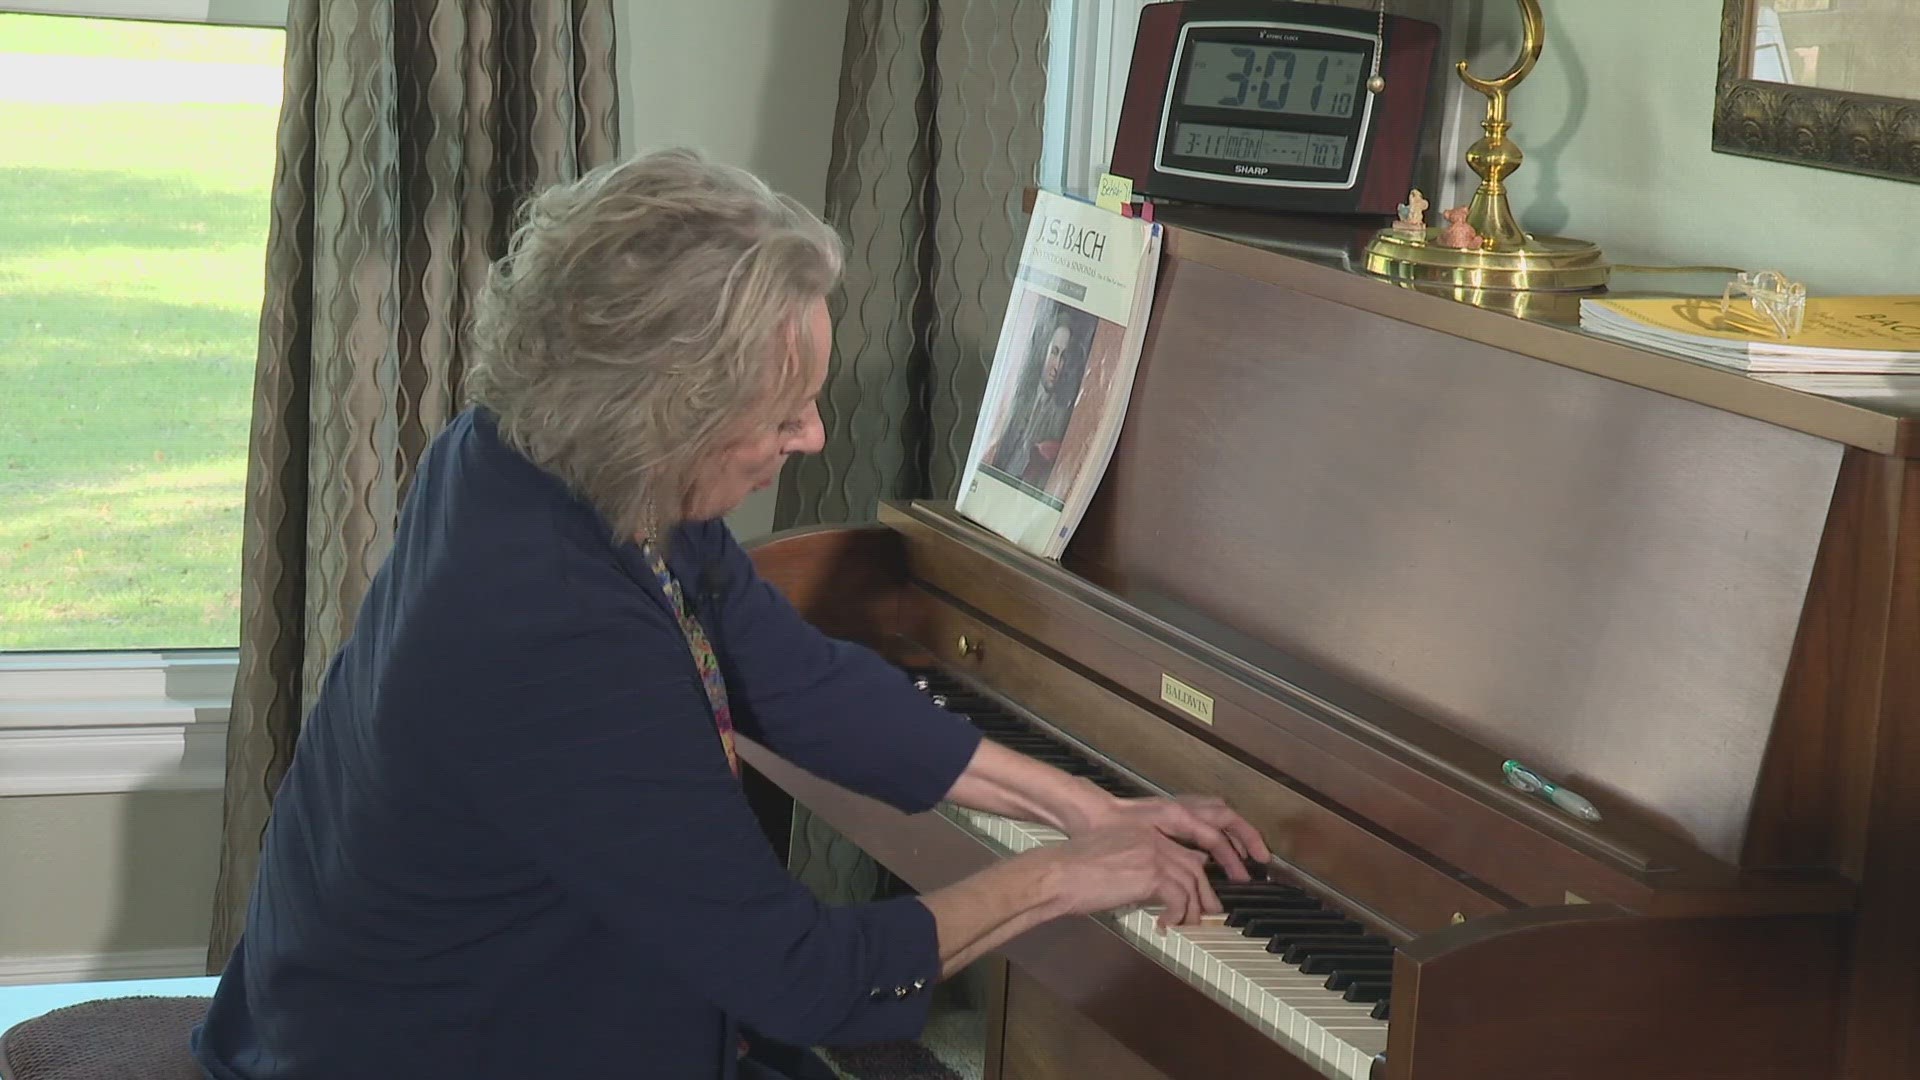 Carla Gibbs called 6 Fix for help after the piano repair technician wouldn't return piano parts almost a year later.